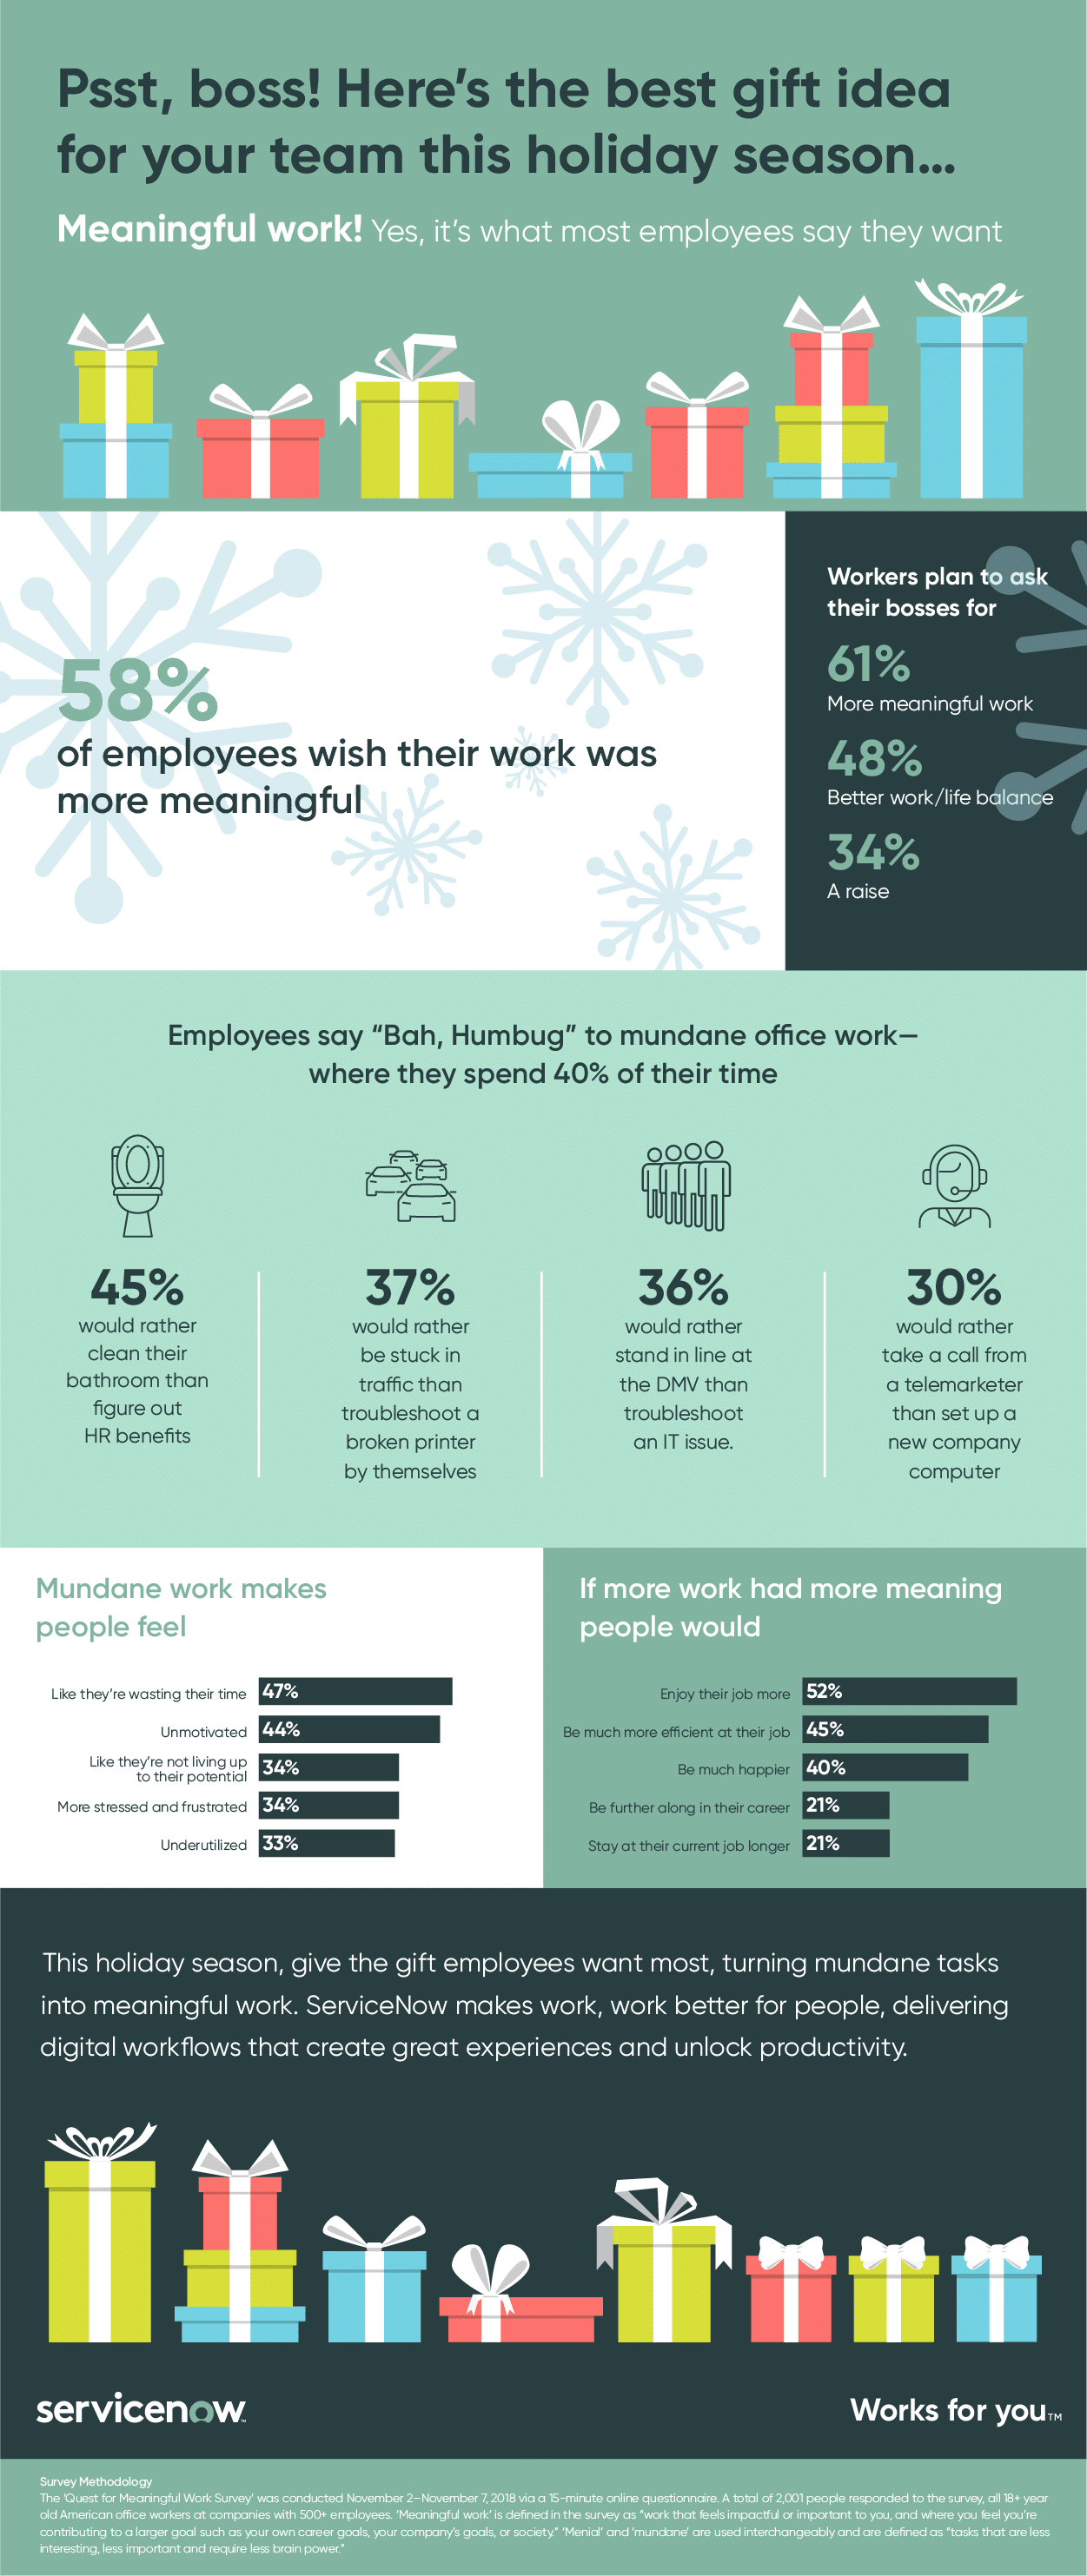 What employees want most this holiday—meaningful work